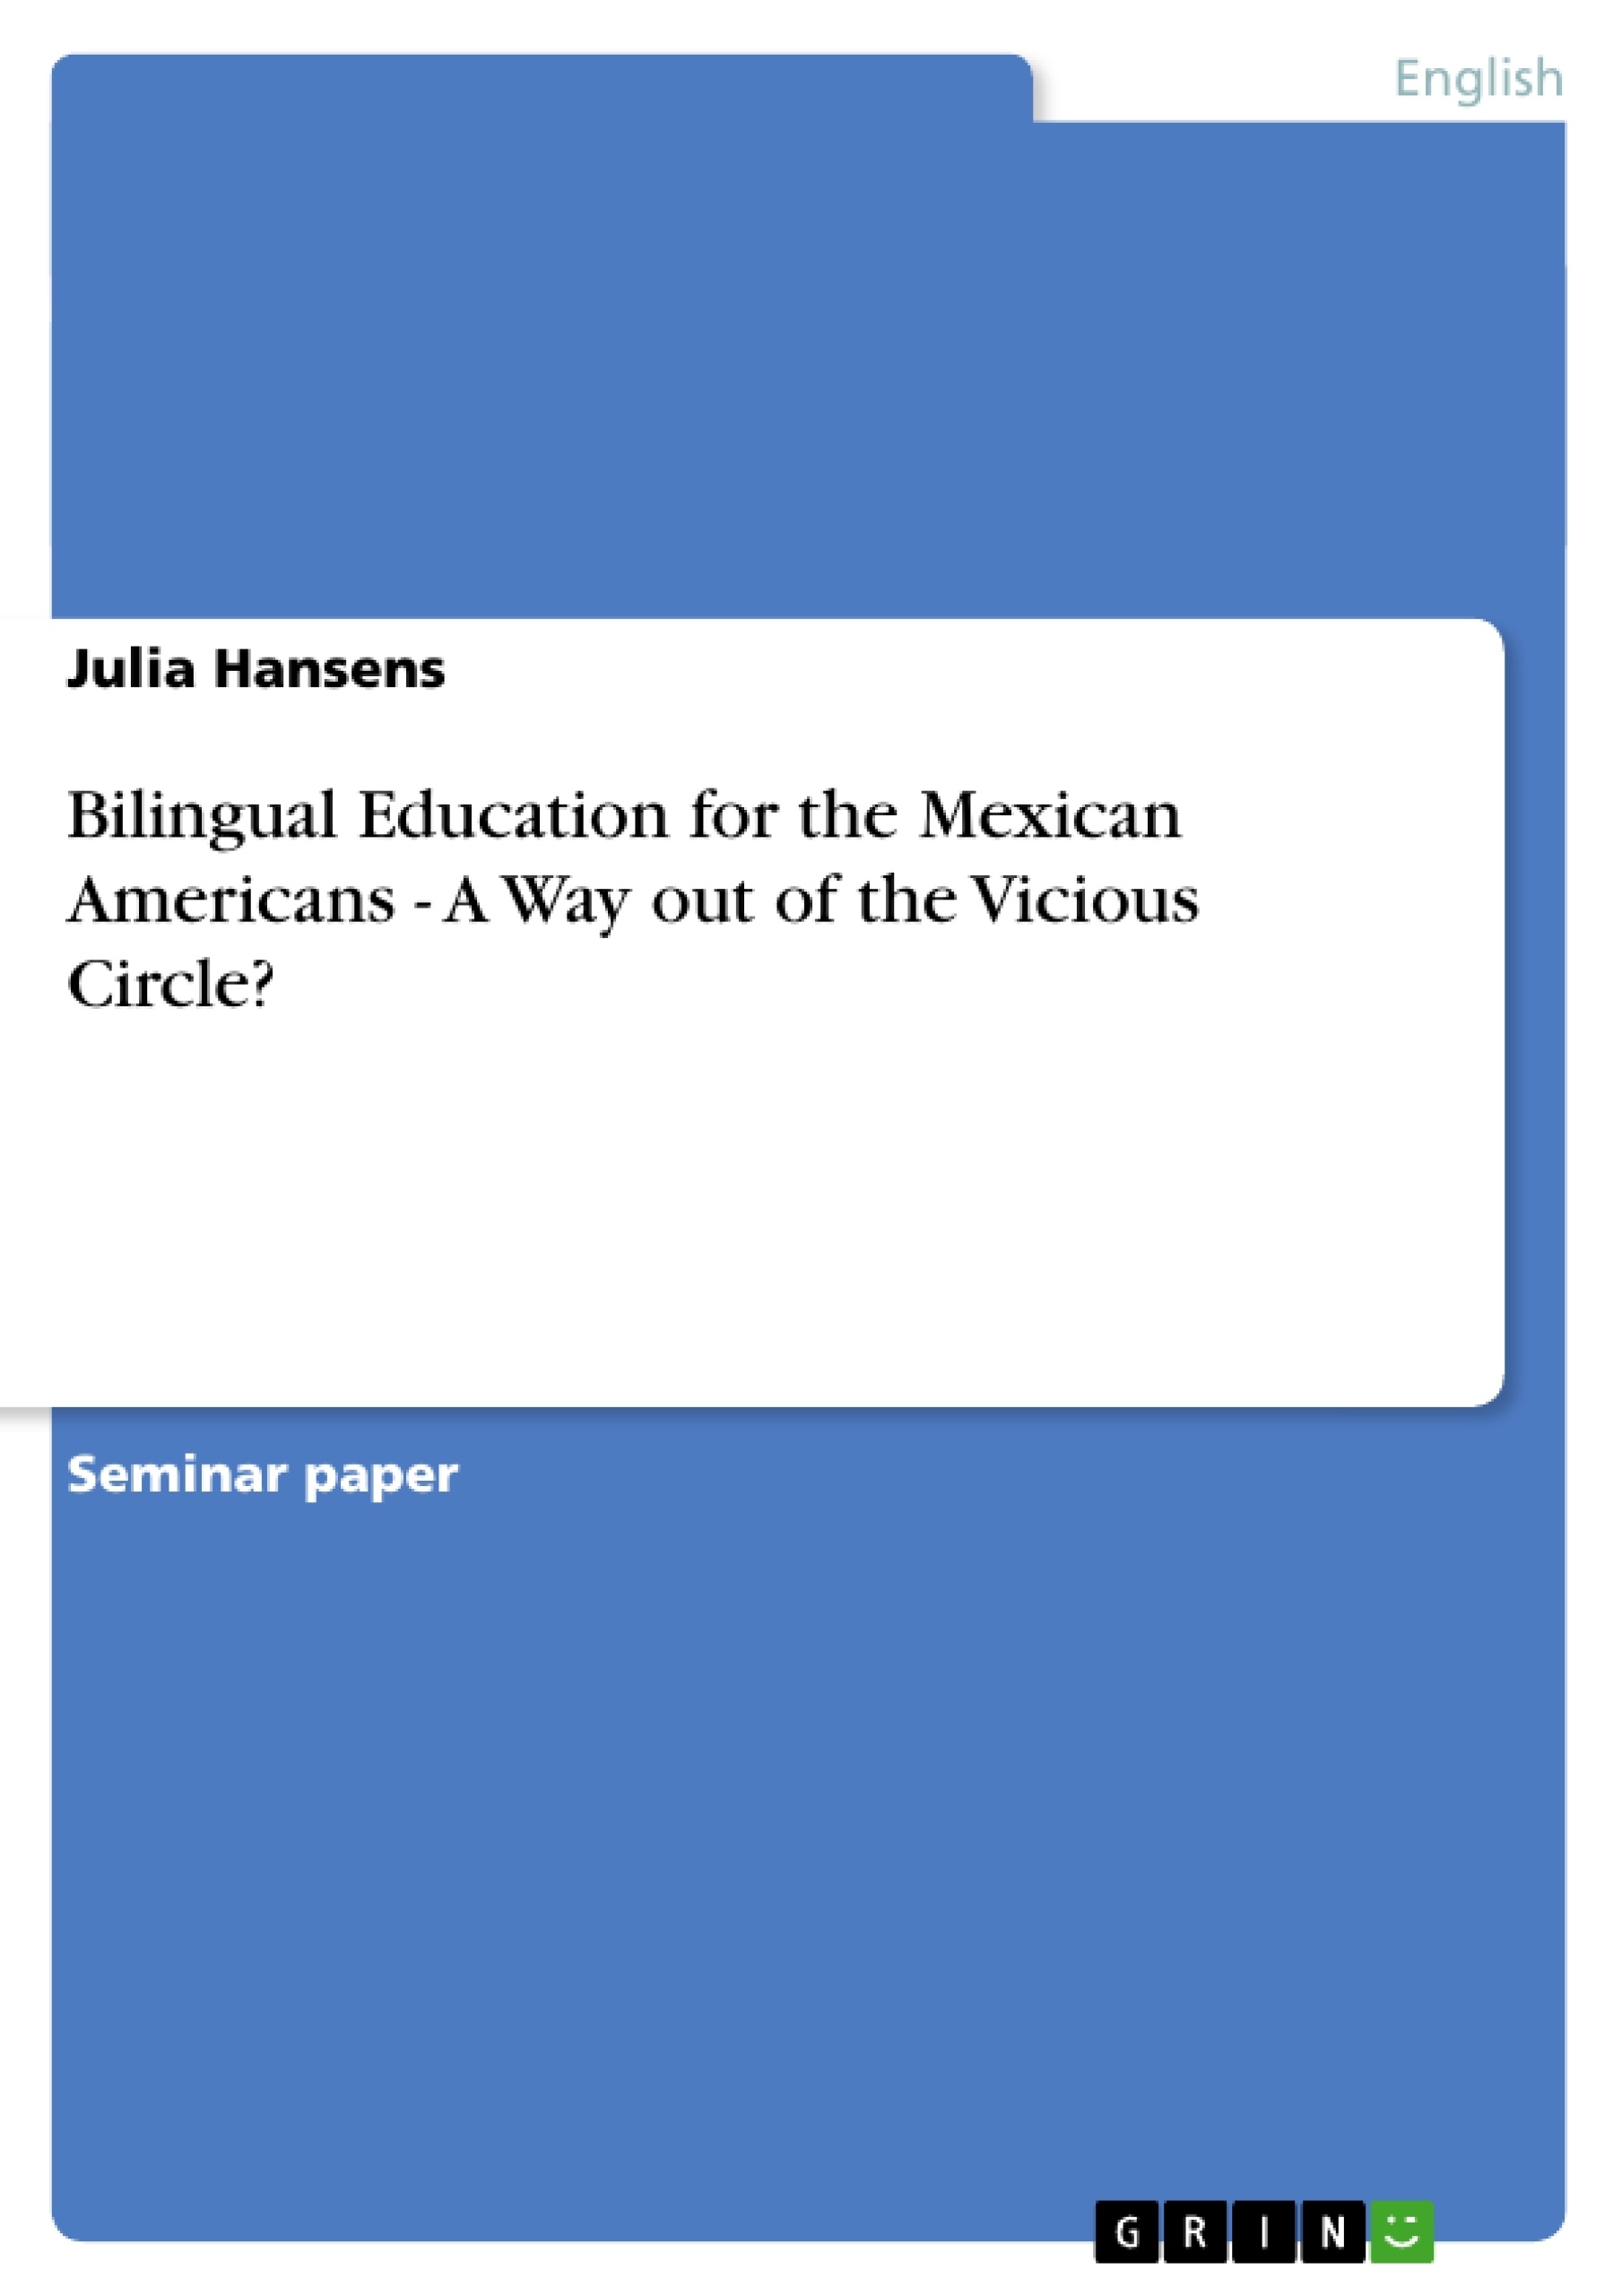 Título: Bilingual Education for the Mexican Americans - A Way out of the Vicious Circle?